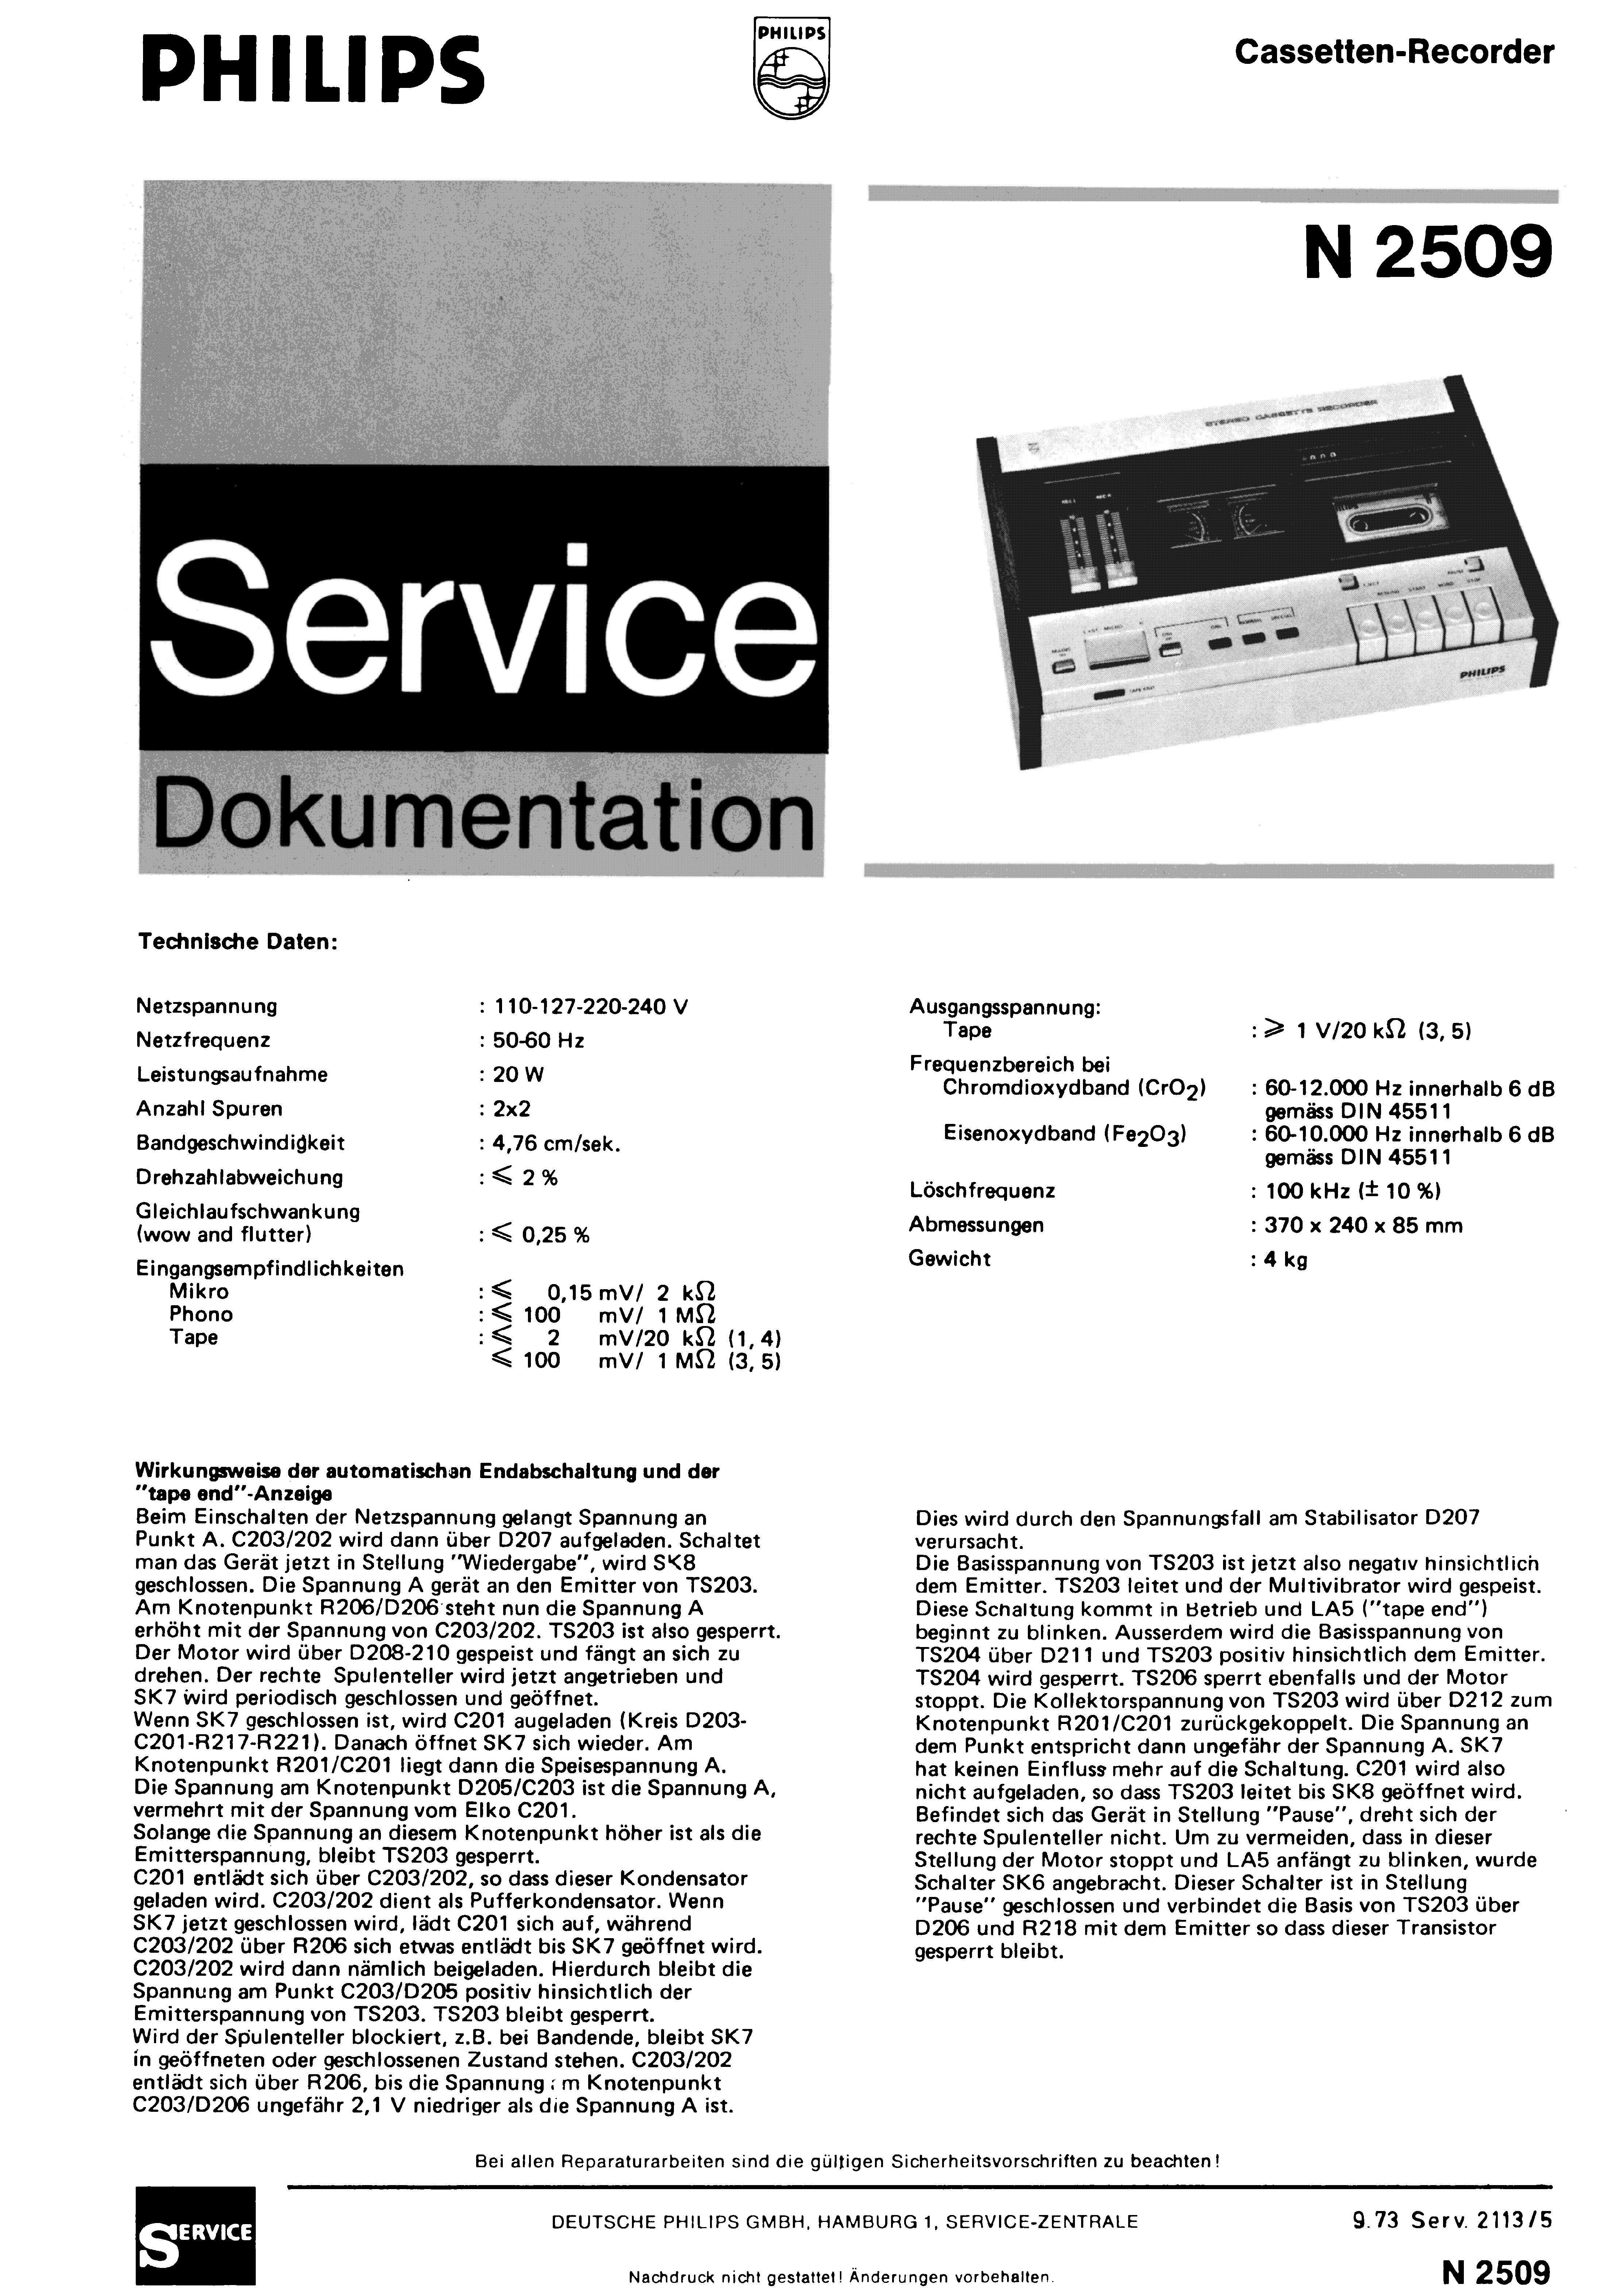 PHILIPS CASSETTEN-RECORDER N2509 SM service manual (1st page)